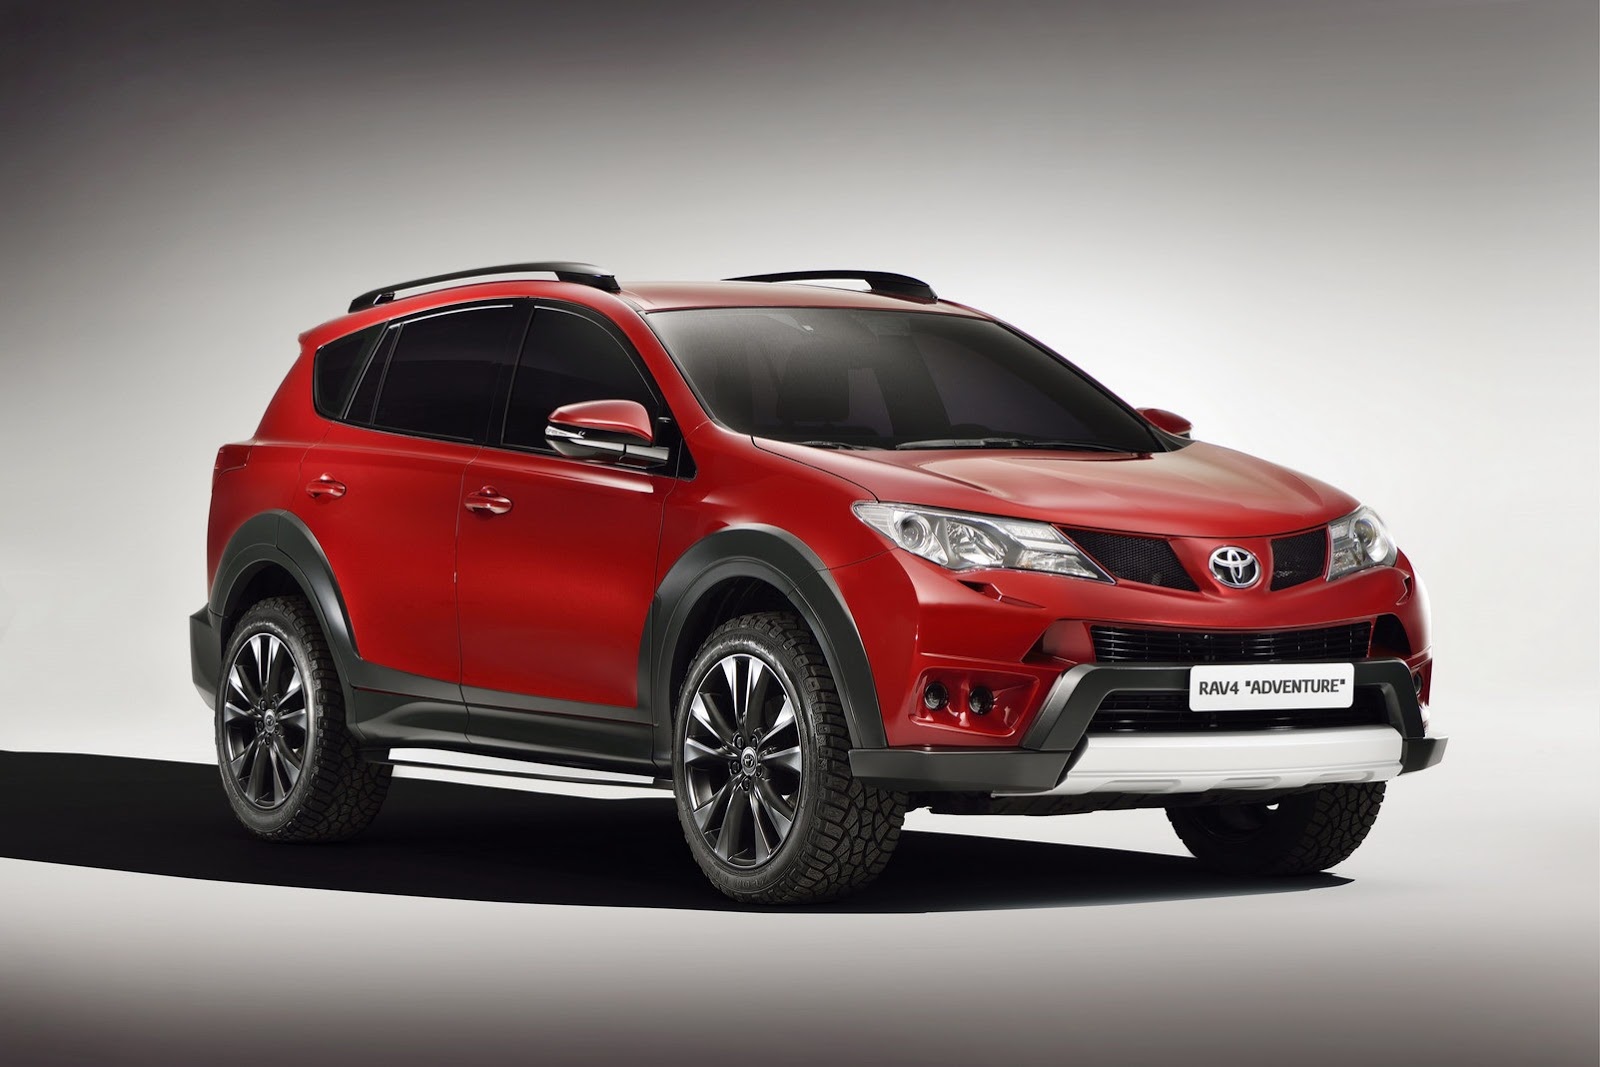 toyota-gets-tough-luxurious-with-new-rav4-concepts-photo-gallery-55963_1